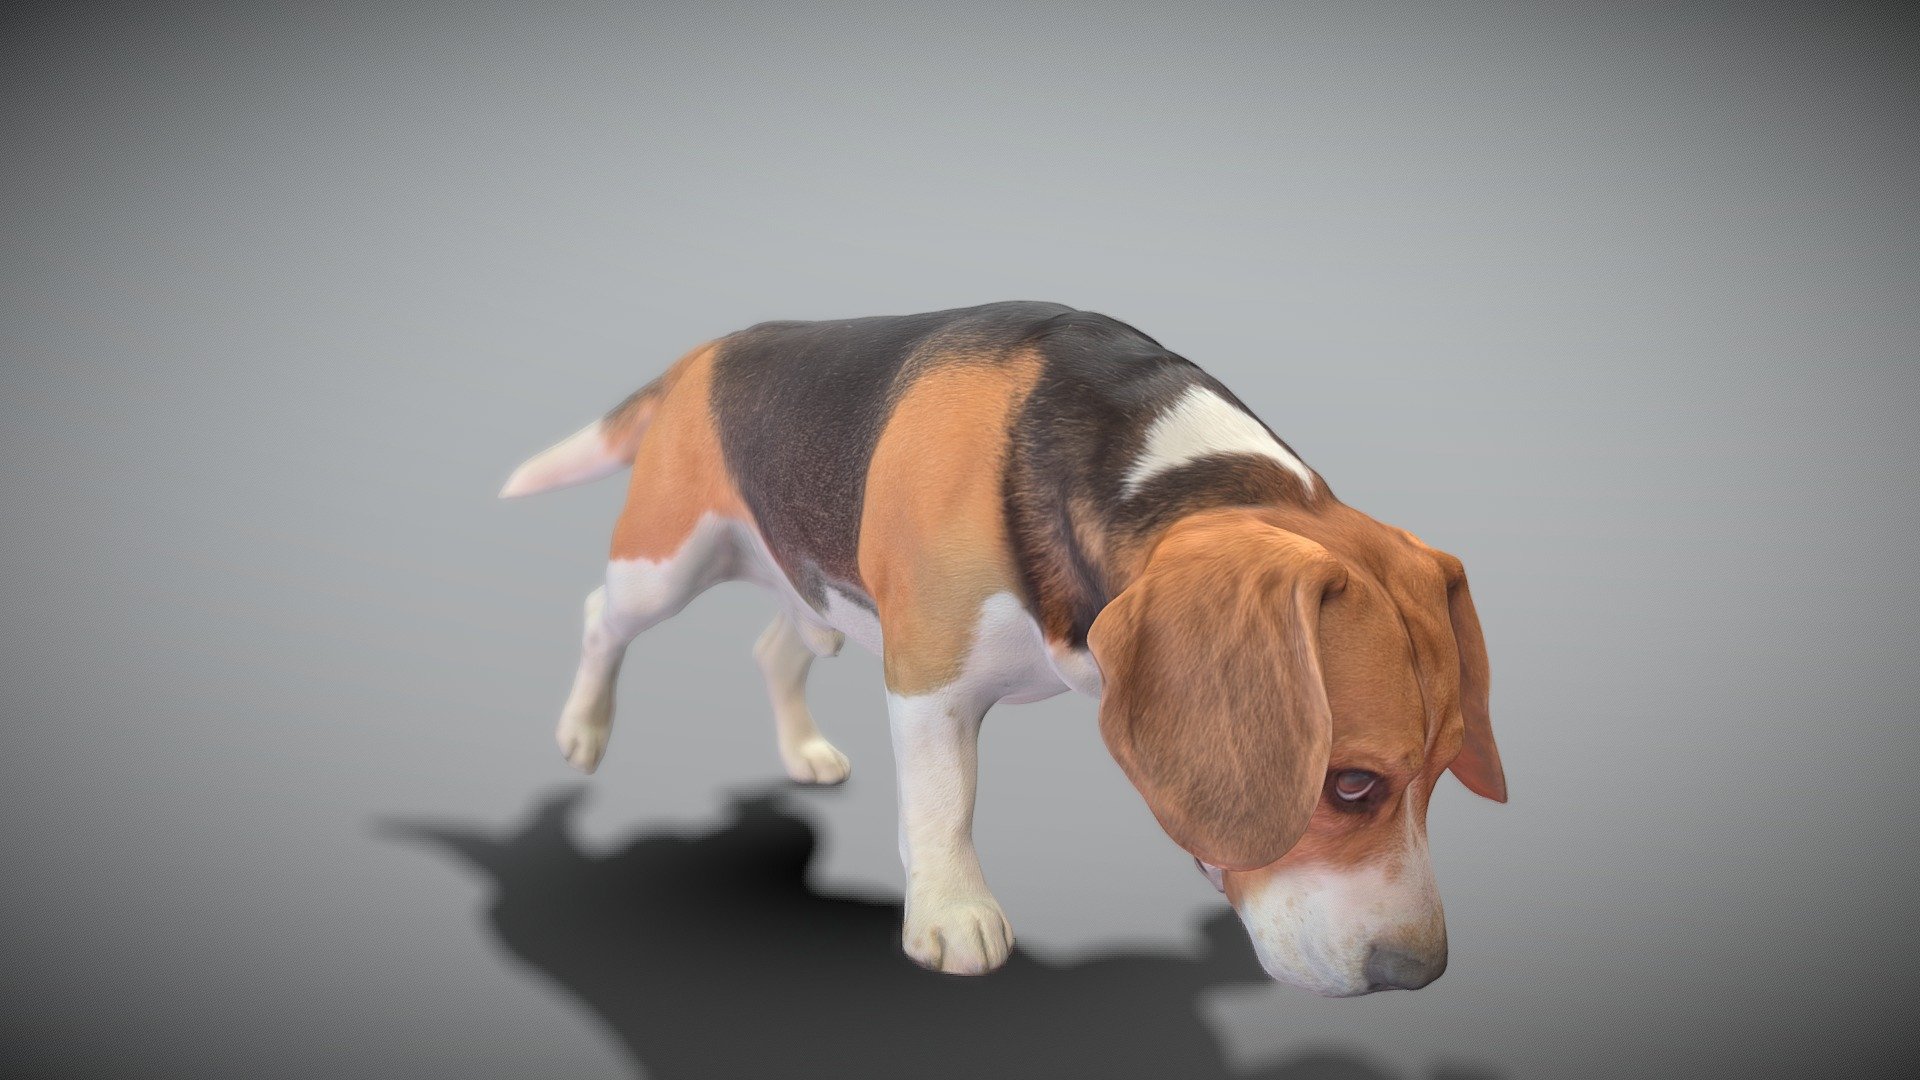 This is a true sized and highly detailed model of a young charming Beagle dog. It will add life and coziness to any architectural visualisation of houses, playgrounds, parques, urban landscapes, etc. This model is suitable for game engine integration, VR/AR content, etc.

Technical specifications:




digital double 3d scan model

150k &amp; 30k triangles | double triangulated

high-poly model (.ztl tool with 5 subdivisions) clean and retopologized automatically via ZRemesher

sufficiently clean

PBR textures 8K resolution: Diffuse, Normal, Specular maps

non-overlapping UV map

no extra plugins are required for this model

Download package includes a Cinema 4D project file with Redshift shader, OBJ, FBX, STL files, which are applicable for 3ds Max, Maya, Unreal Engine, Unity, Blender, etc. All the textures you will find in the “Tex” folder, included into the main archive.

3D EVERYTHING

Stand with Ukraine! - Beagle 40 - Buy Royalty Free 3D model by deep3dstudio 3d model